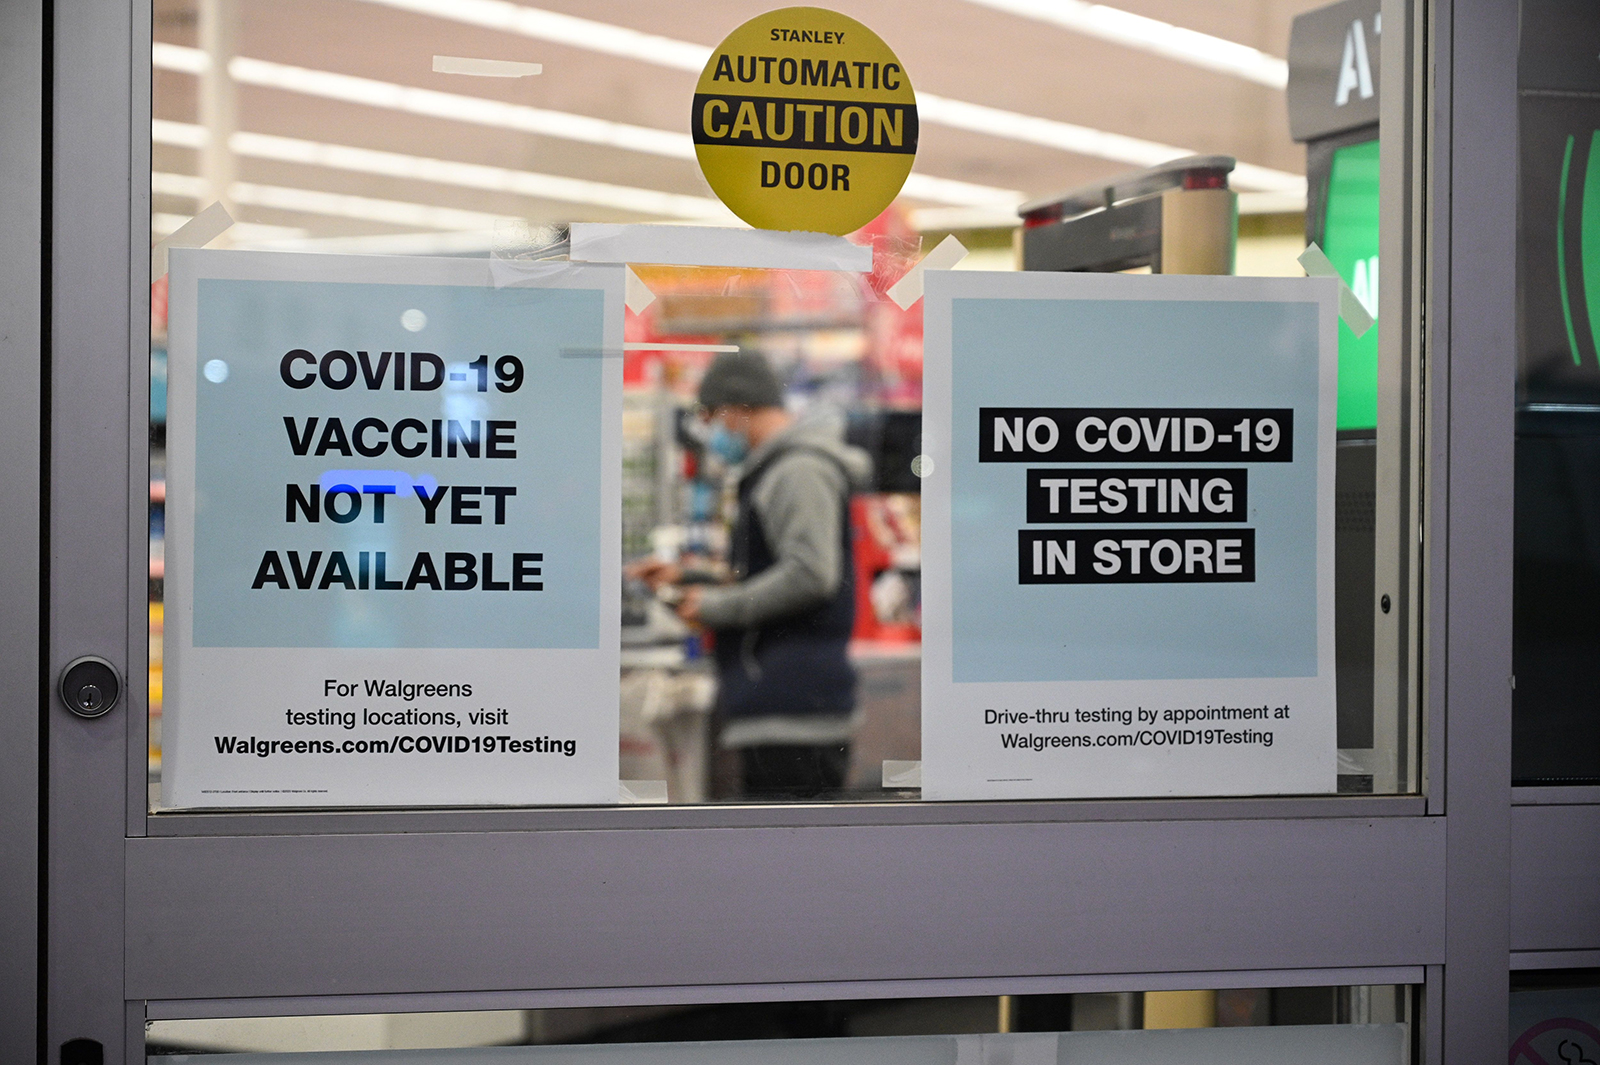 A sign on the entrance to a pharmacy reads "Covid-19 Vaccine Not Yet Available", Nov. 23, in Burbank, California.